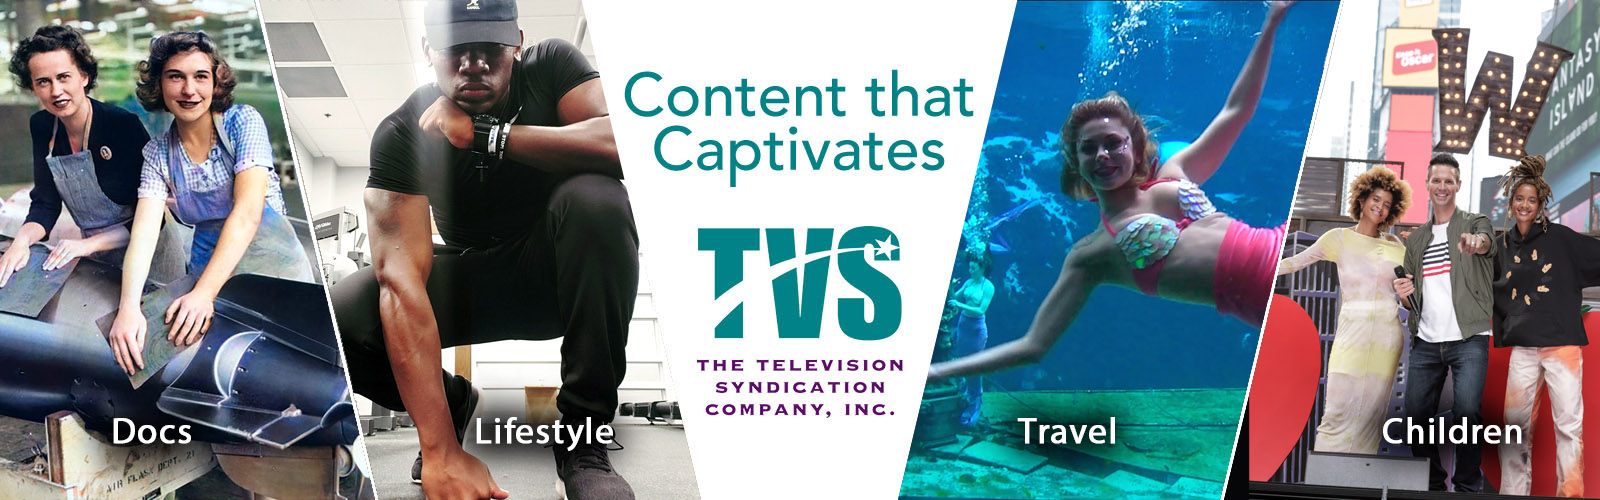 The Television Syndication Company, Inc. (TVS)